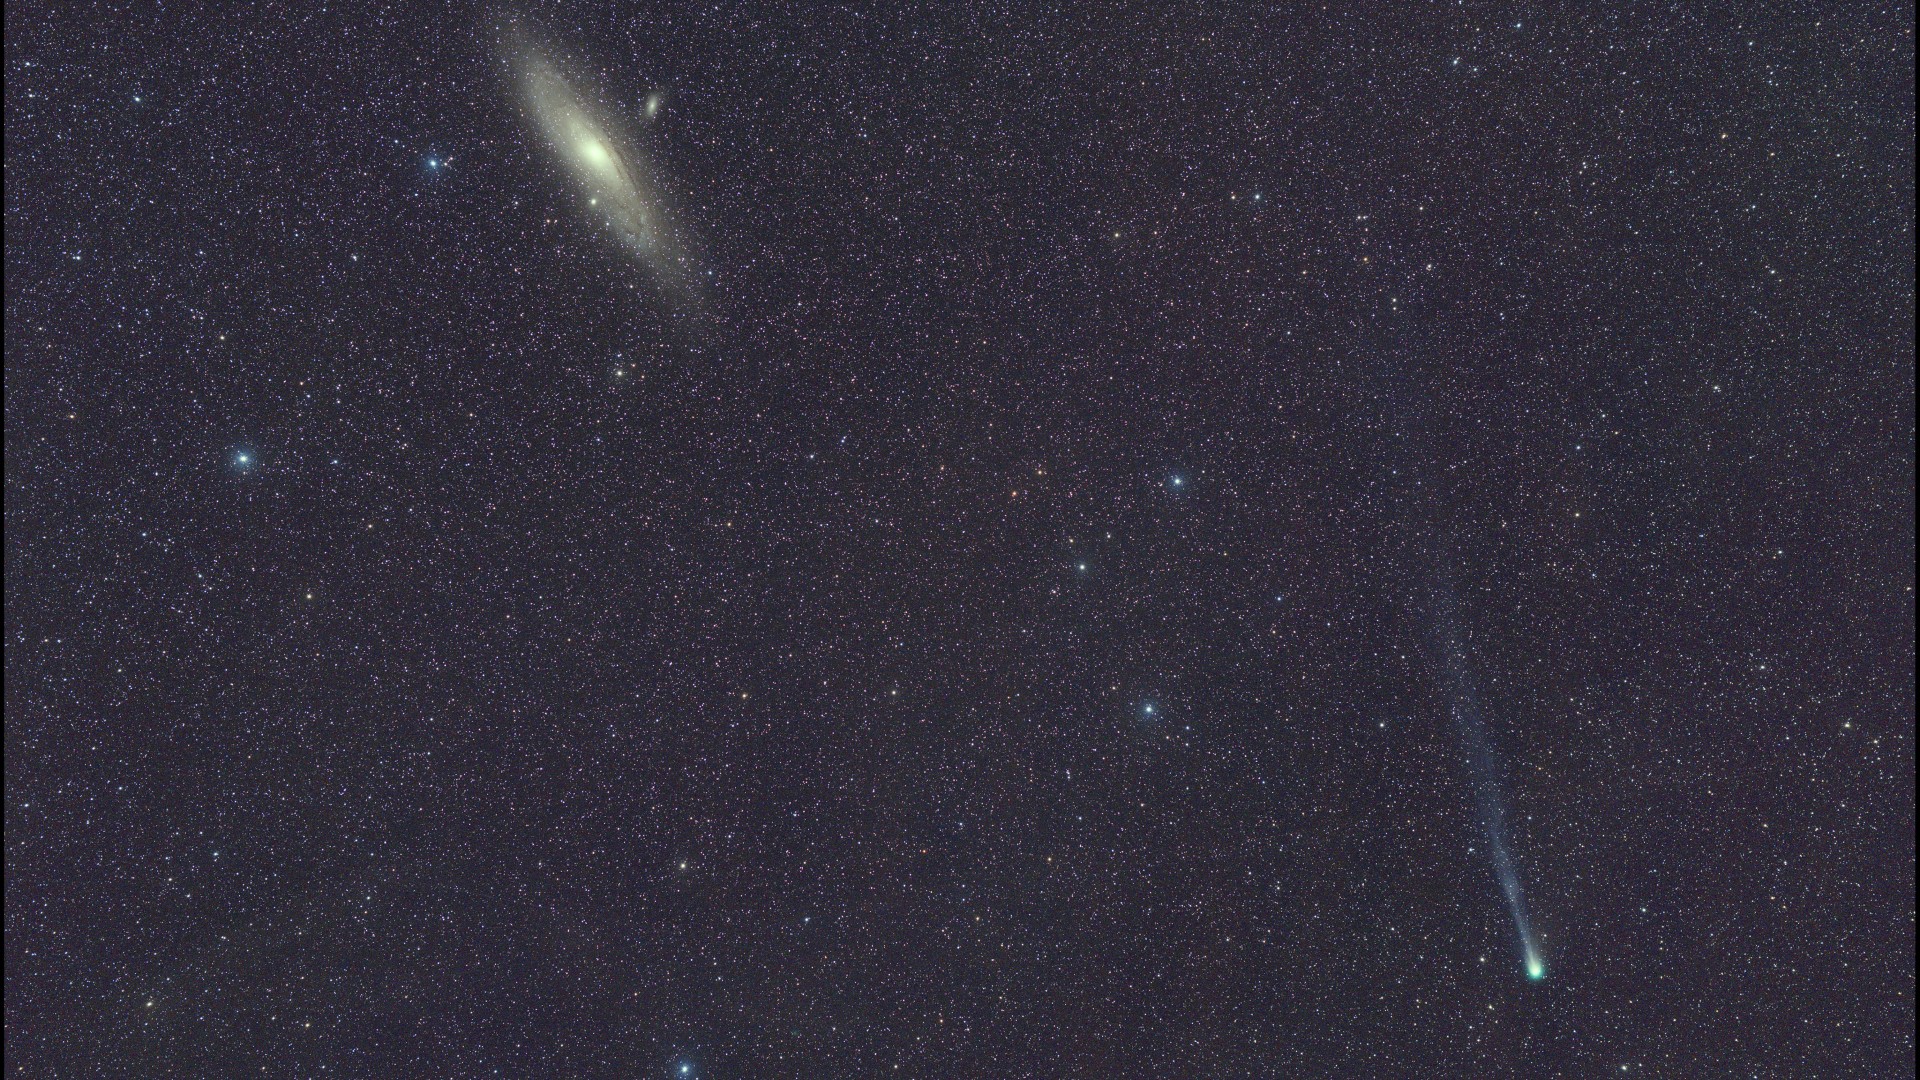 a bright, fuzzy dot can be seen among a background of stars, leaving a wispy trail behind it